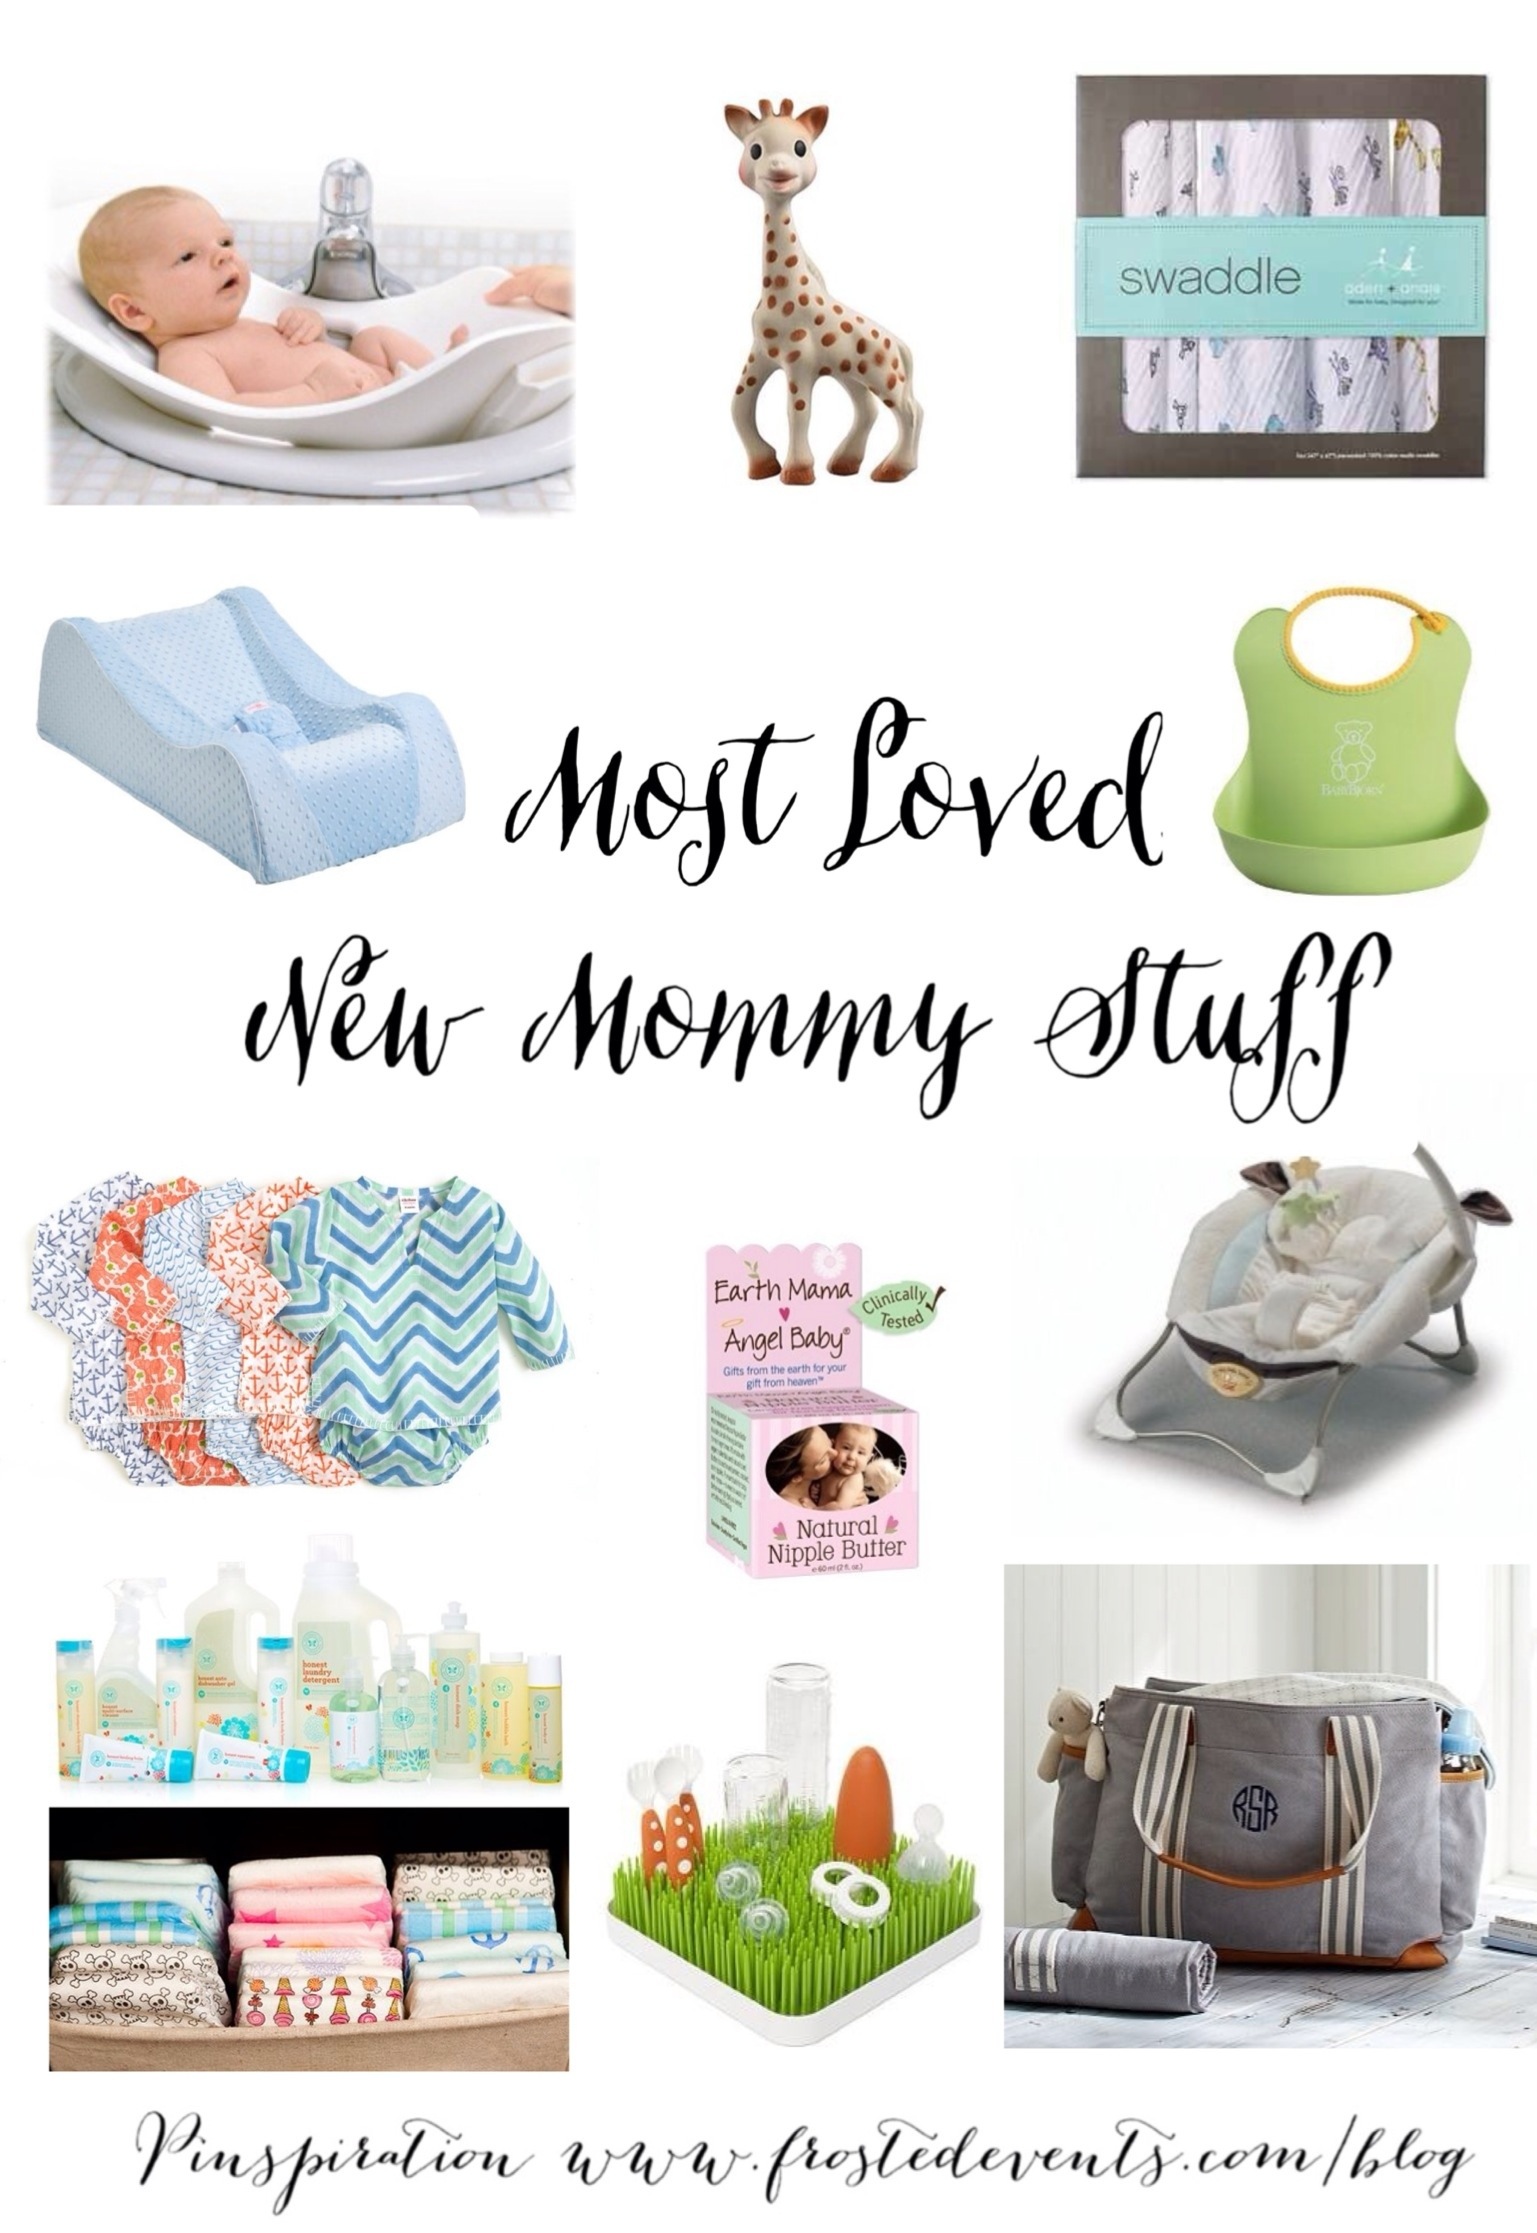 Most Loved New Mommy Stuff- Essentials for Baby Registry List www.frostedevents.com